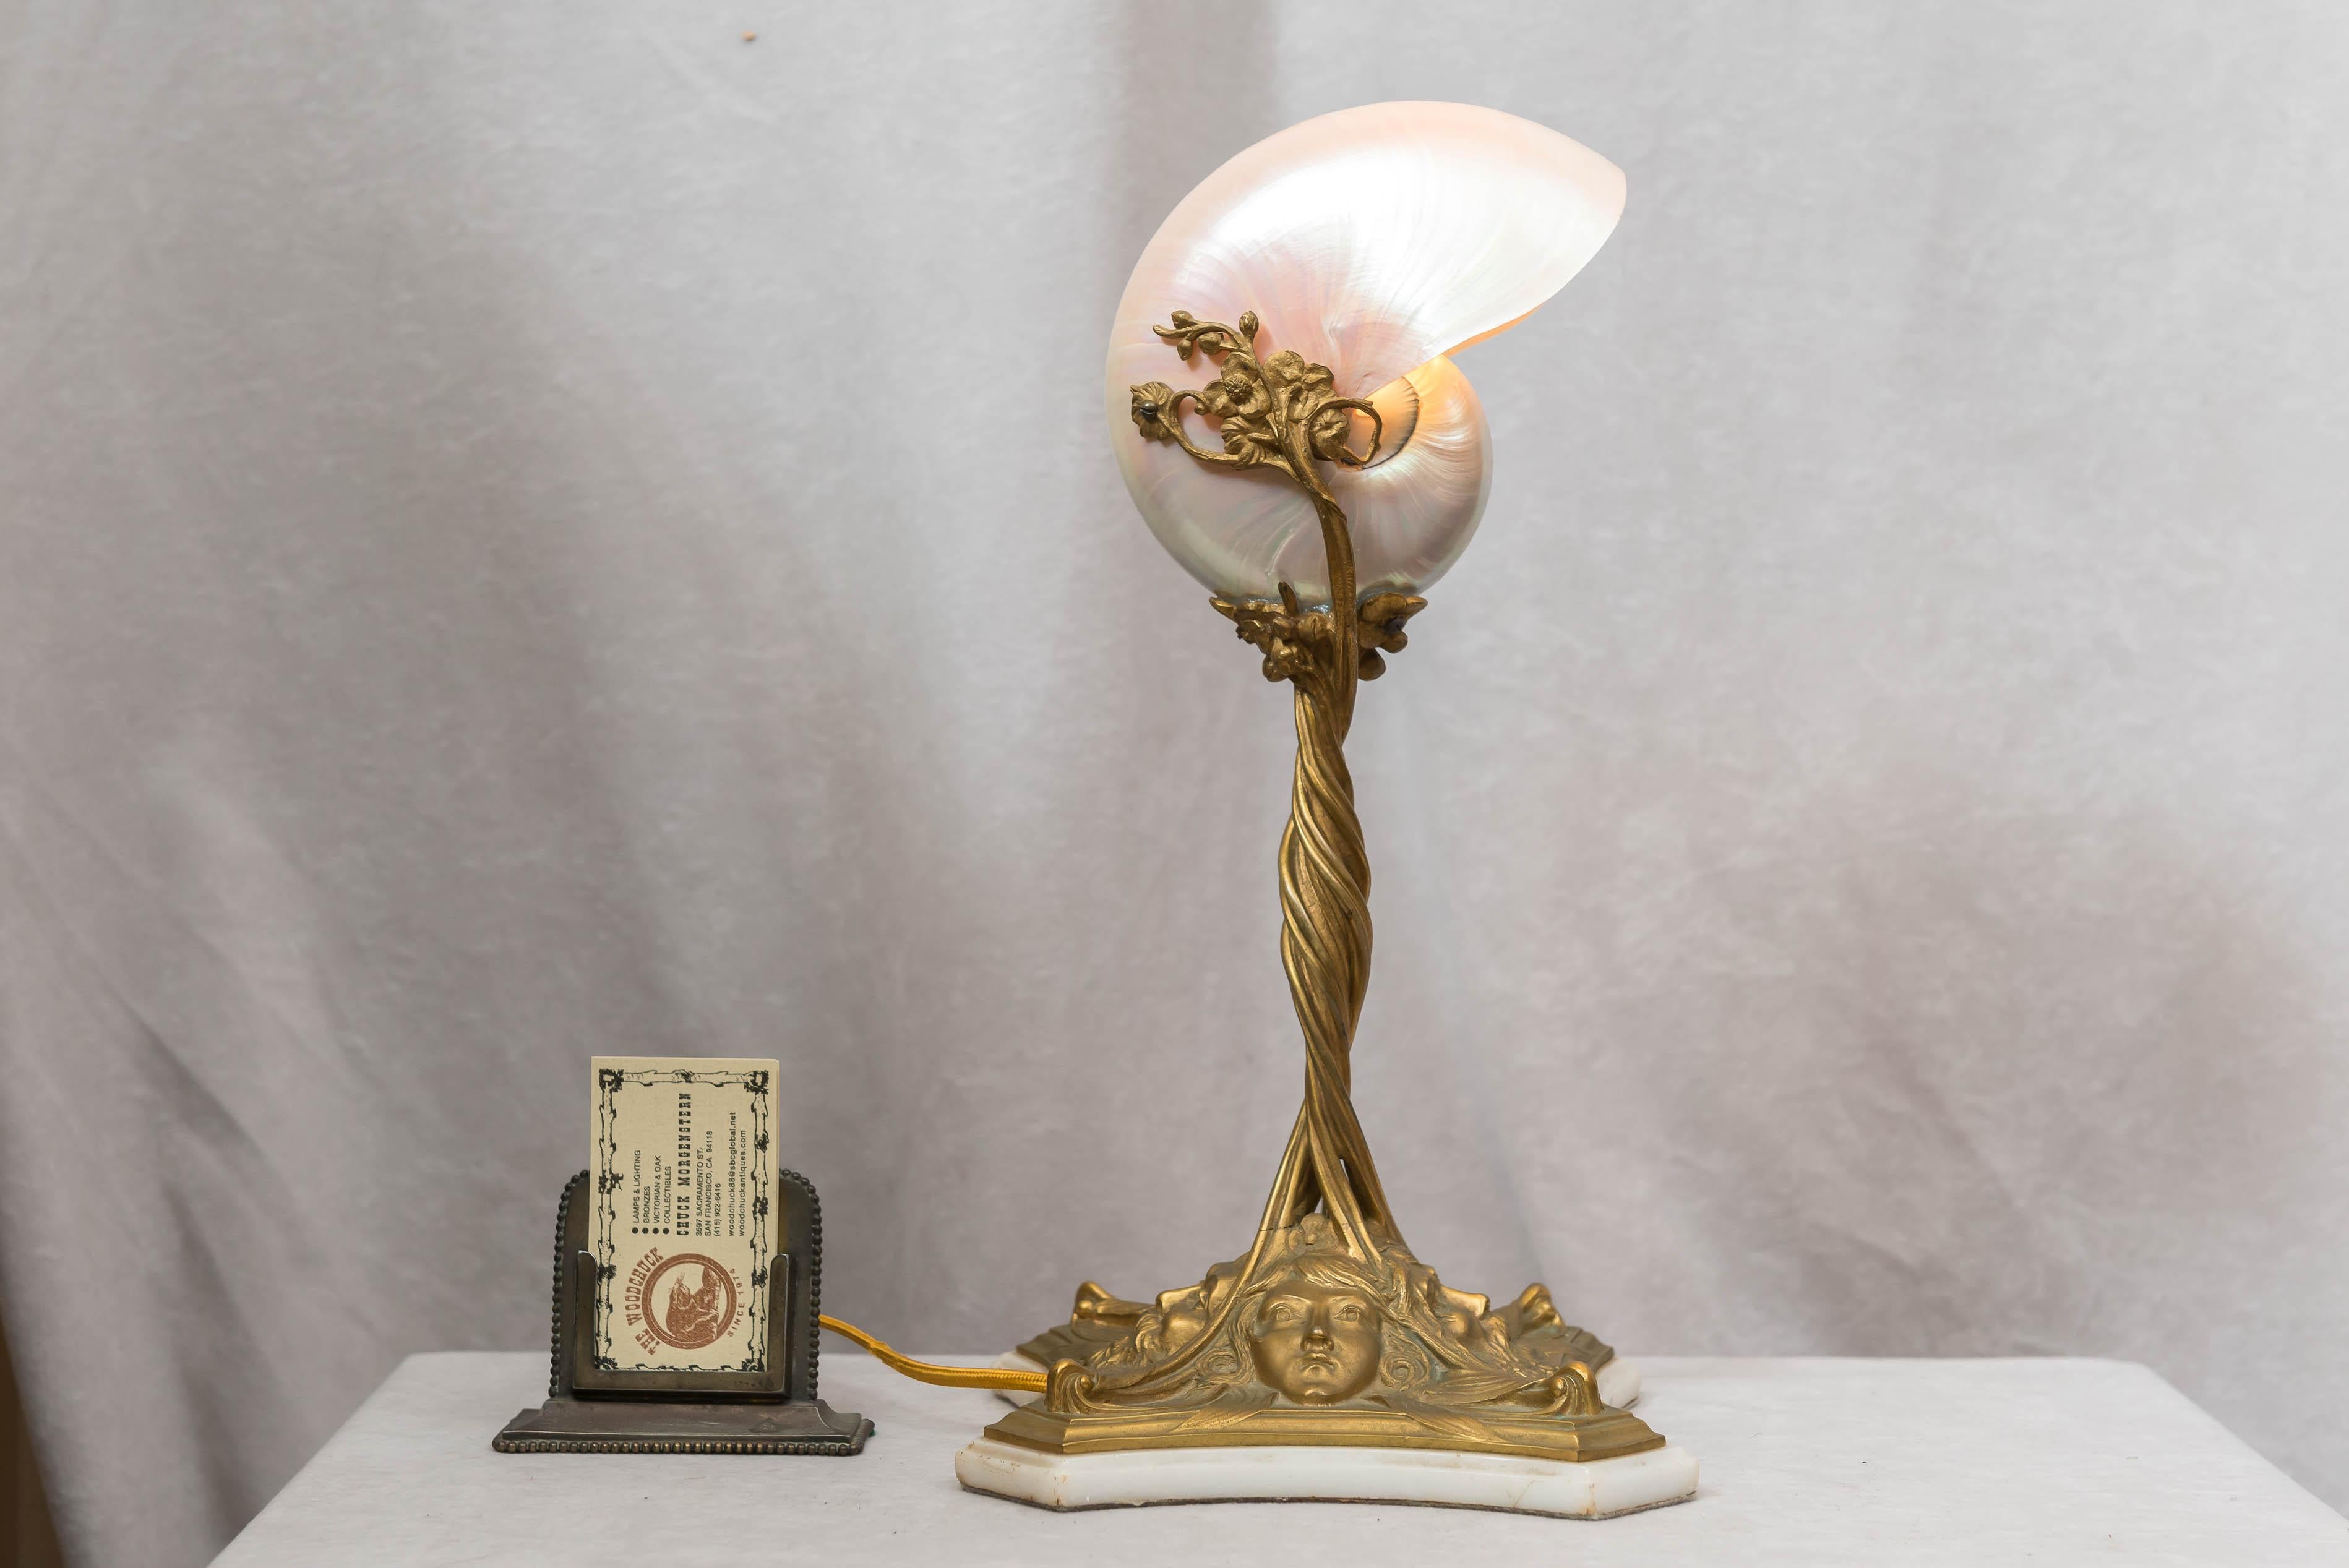 This has to be one of the best lamps we have in the shop currently. We are always looking for nautilus shell lamps, and oddly as rare as they come up for sale, the metal work is almost always disappointing. Not bronze, nor well cast, disappointing.